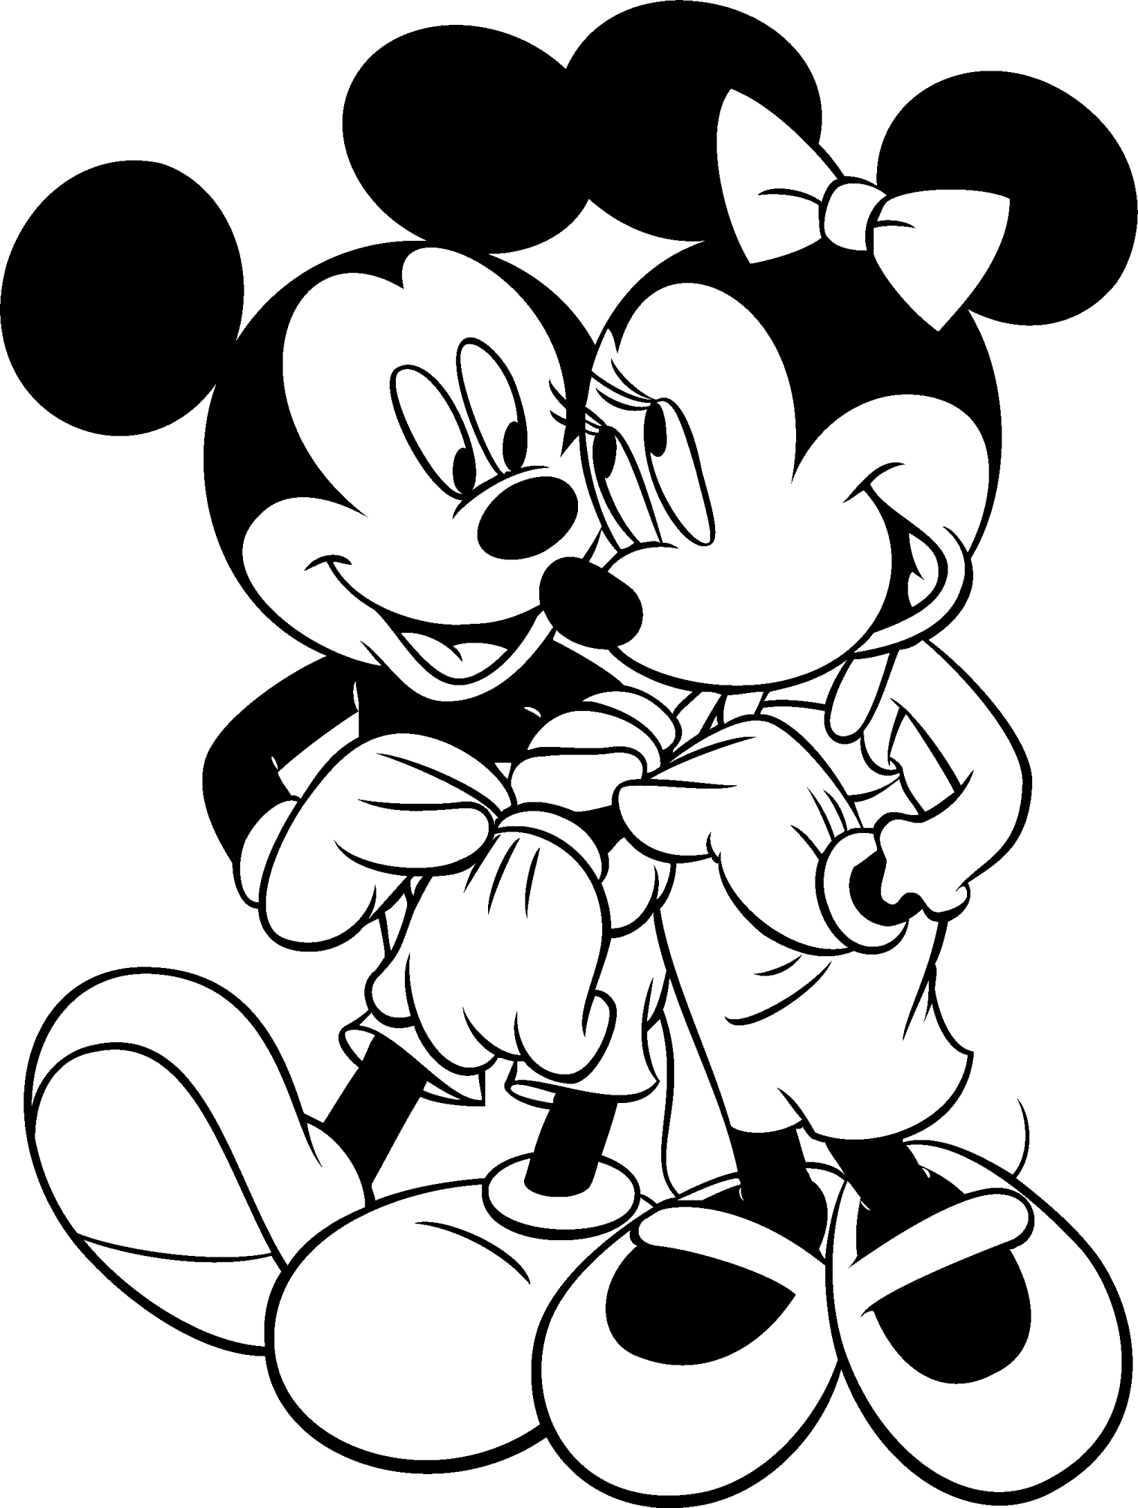 mickey-mouse-and-minnie-mouse-kissing-disney-coloring-pages-kids